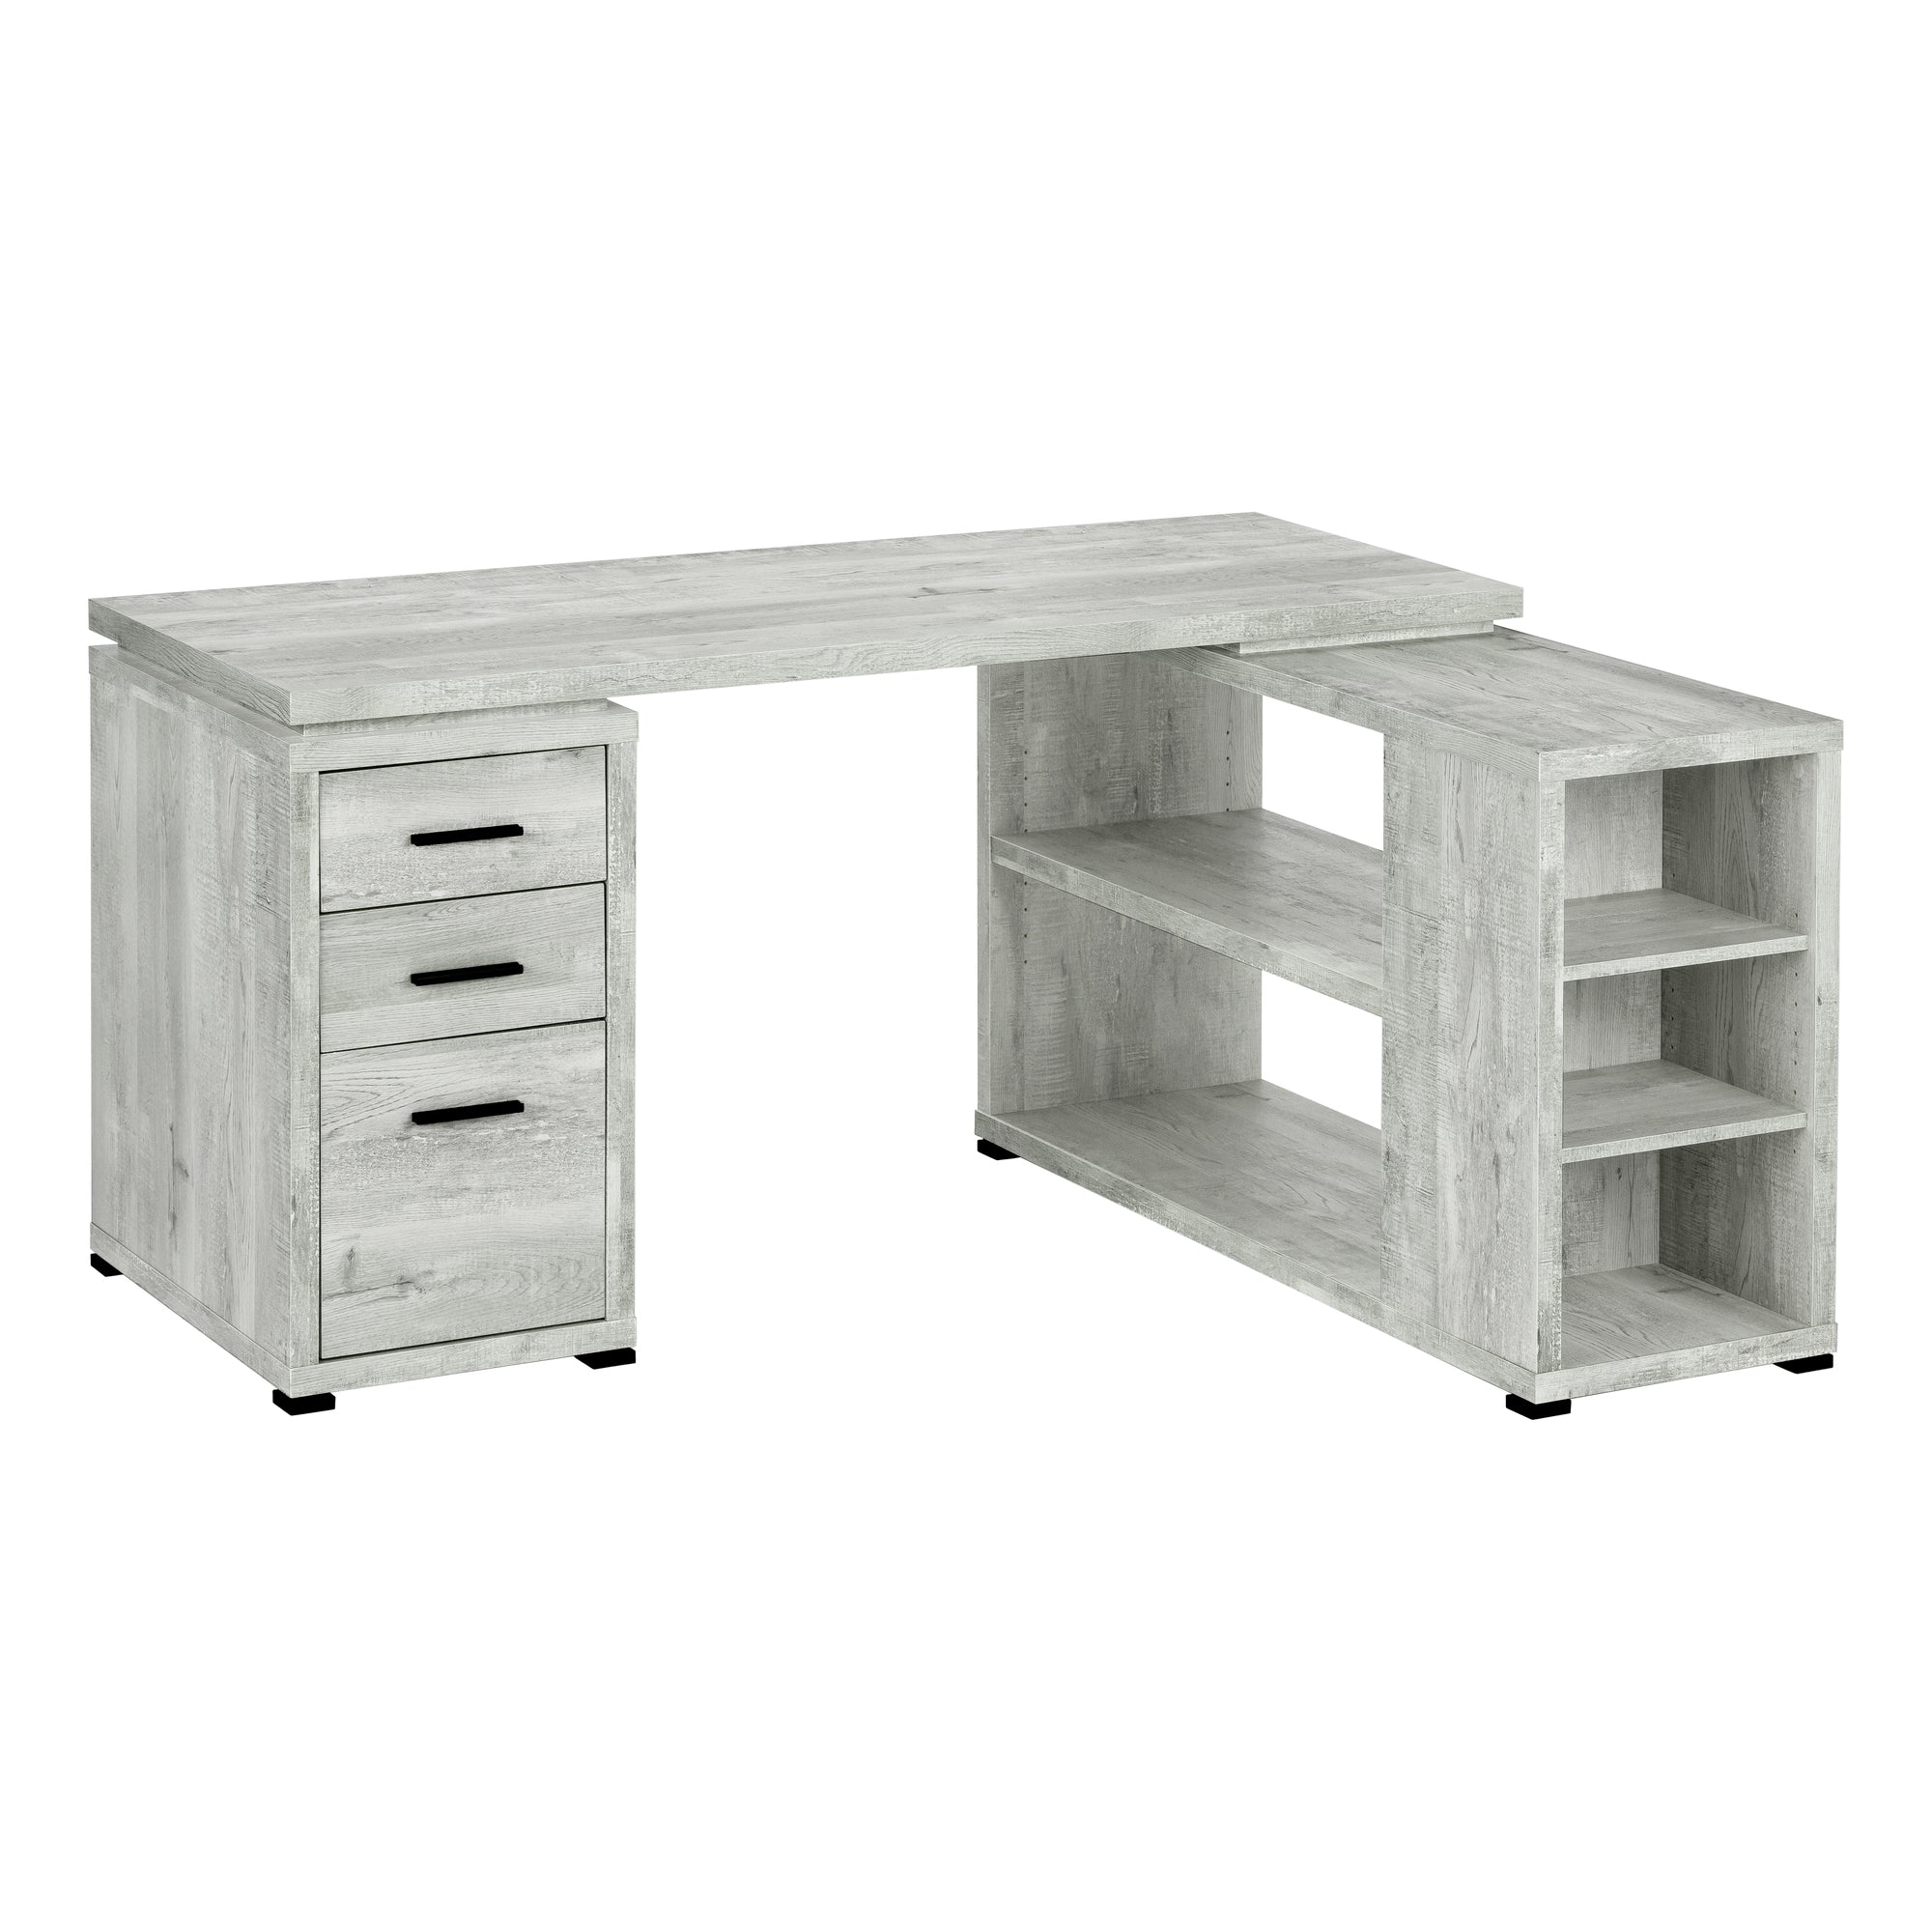 MN-877421    Computer Desk, Home Office, Corner, Left, Right Set-Up, Storage Drawers, L Shape, Laminate, Grey Reclaimed Wood Look, Black, Contemporary, Modern